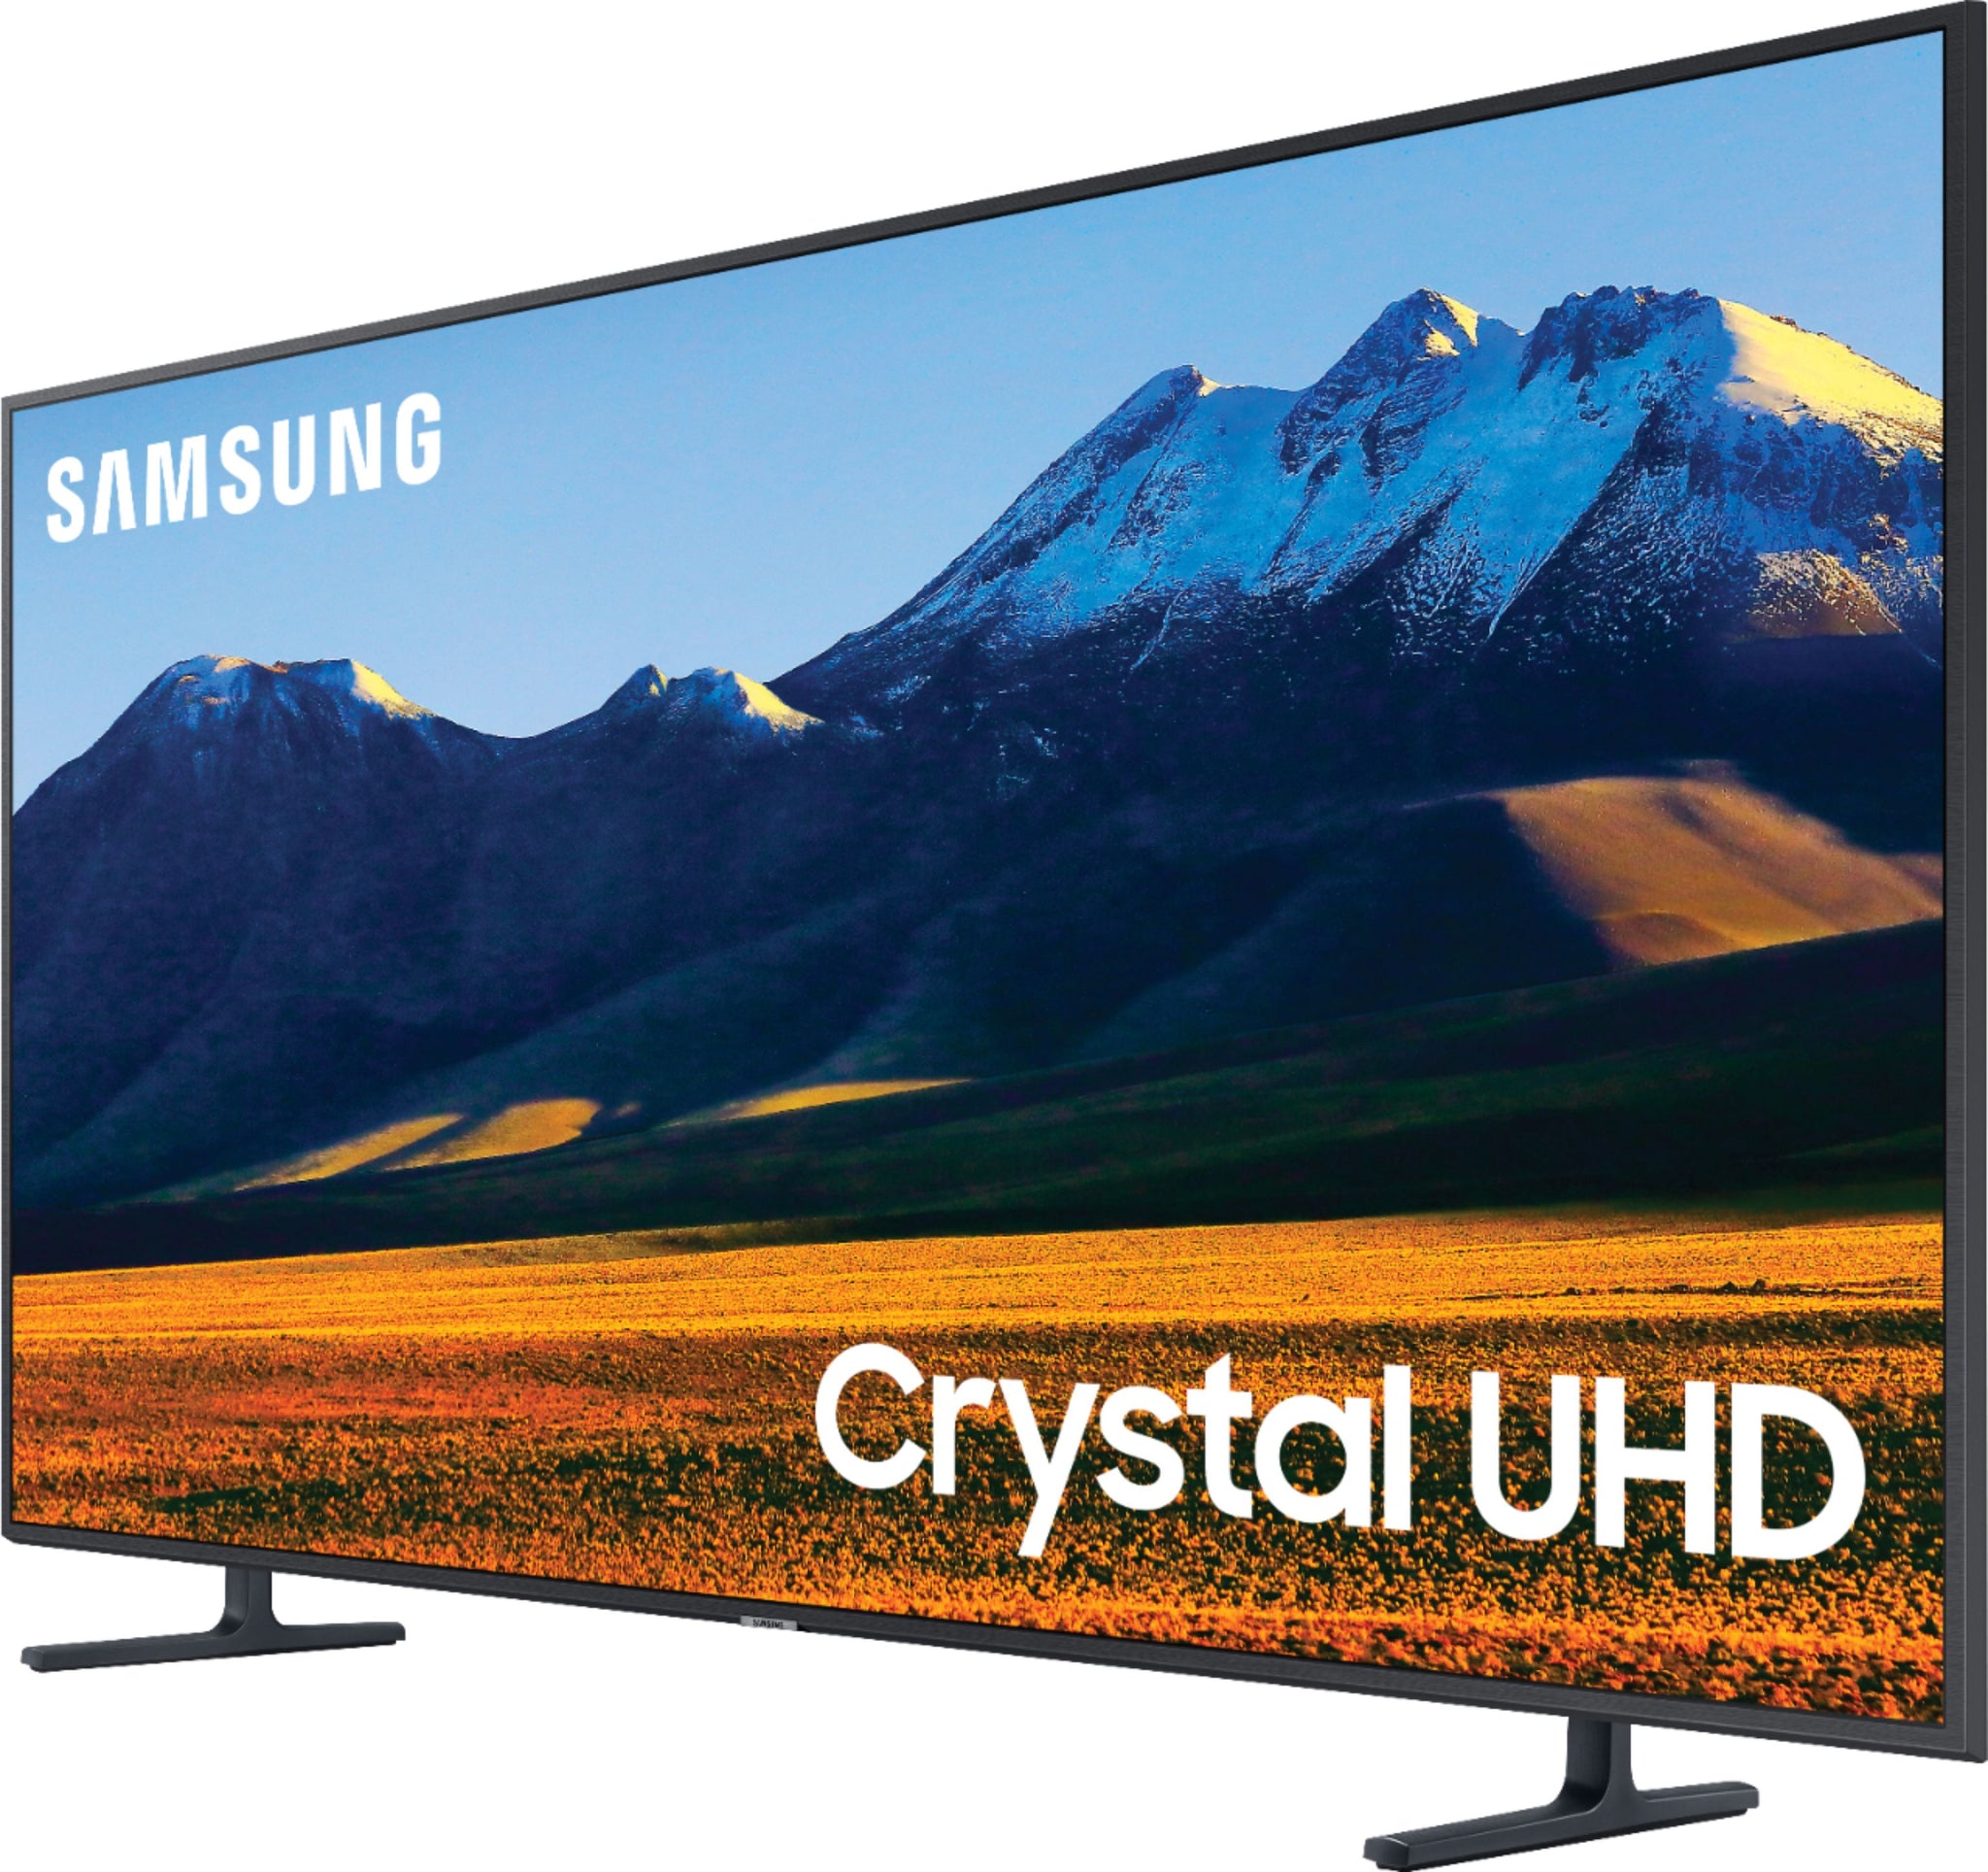 Samsung 75" 4K Crystal UHD HDR Smart TV(Refurbished) Tv's ONLY for delivery in San Diego and Tijuana